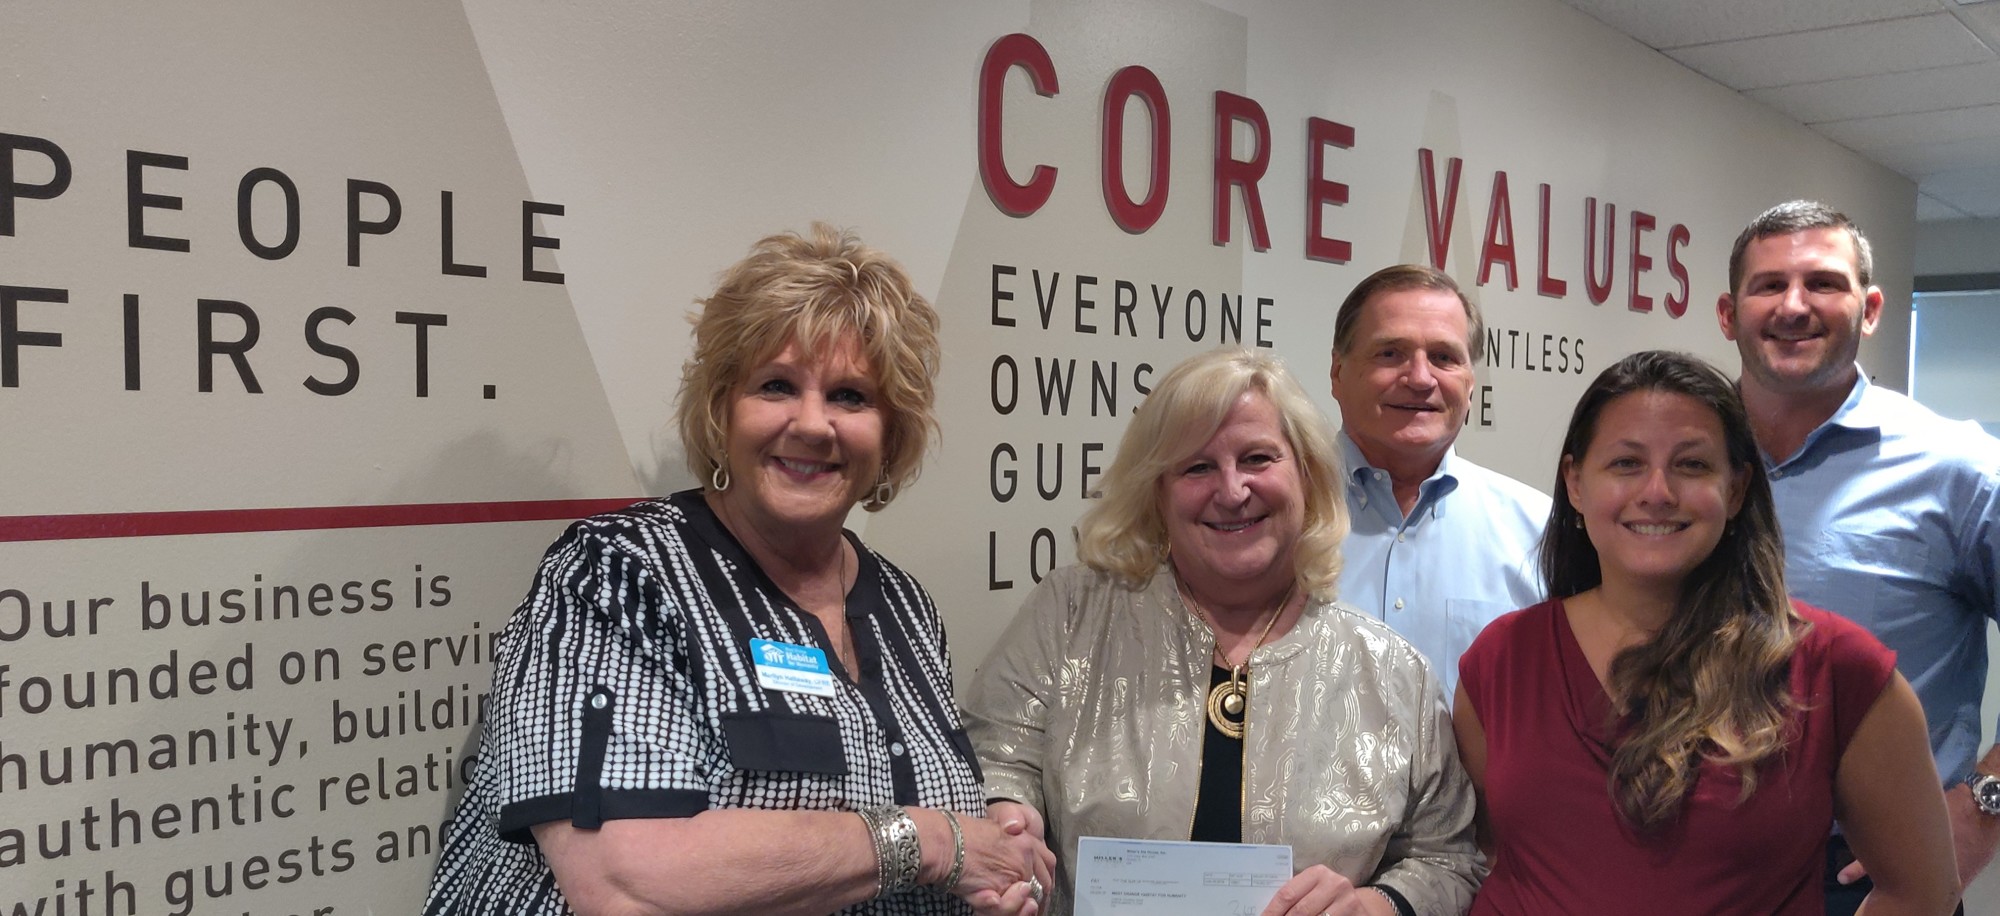 Representatives from Miller’s Ale House presented a check to Marilyn Hattaway, executive director of West Orange Habitat for Humanity.